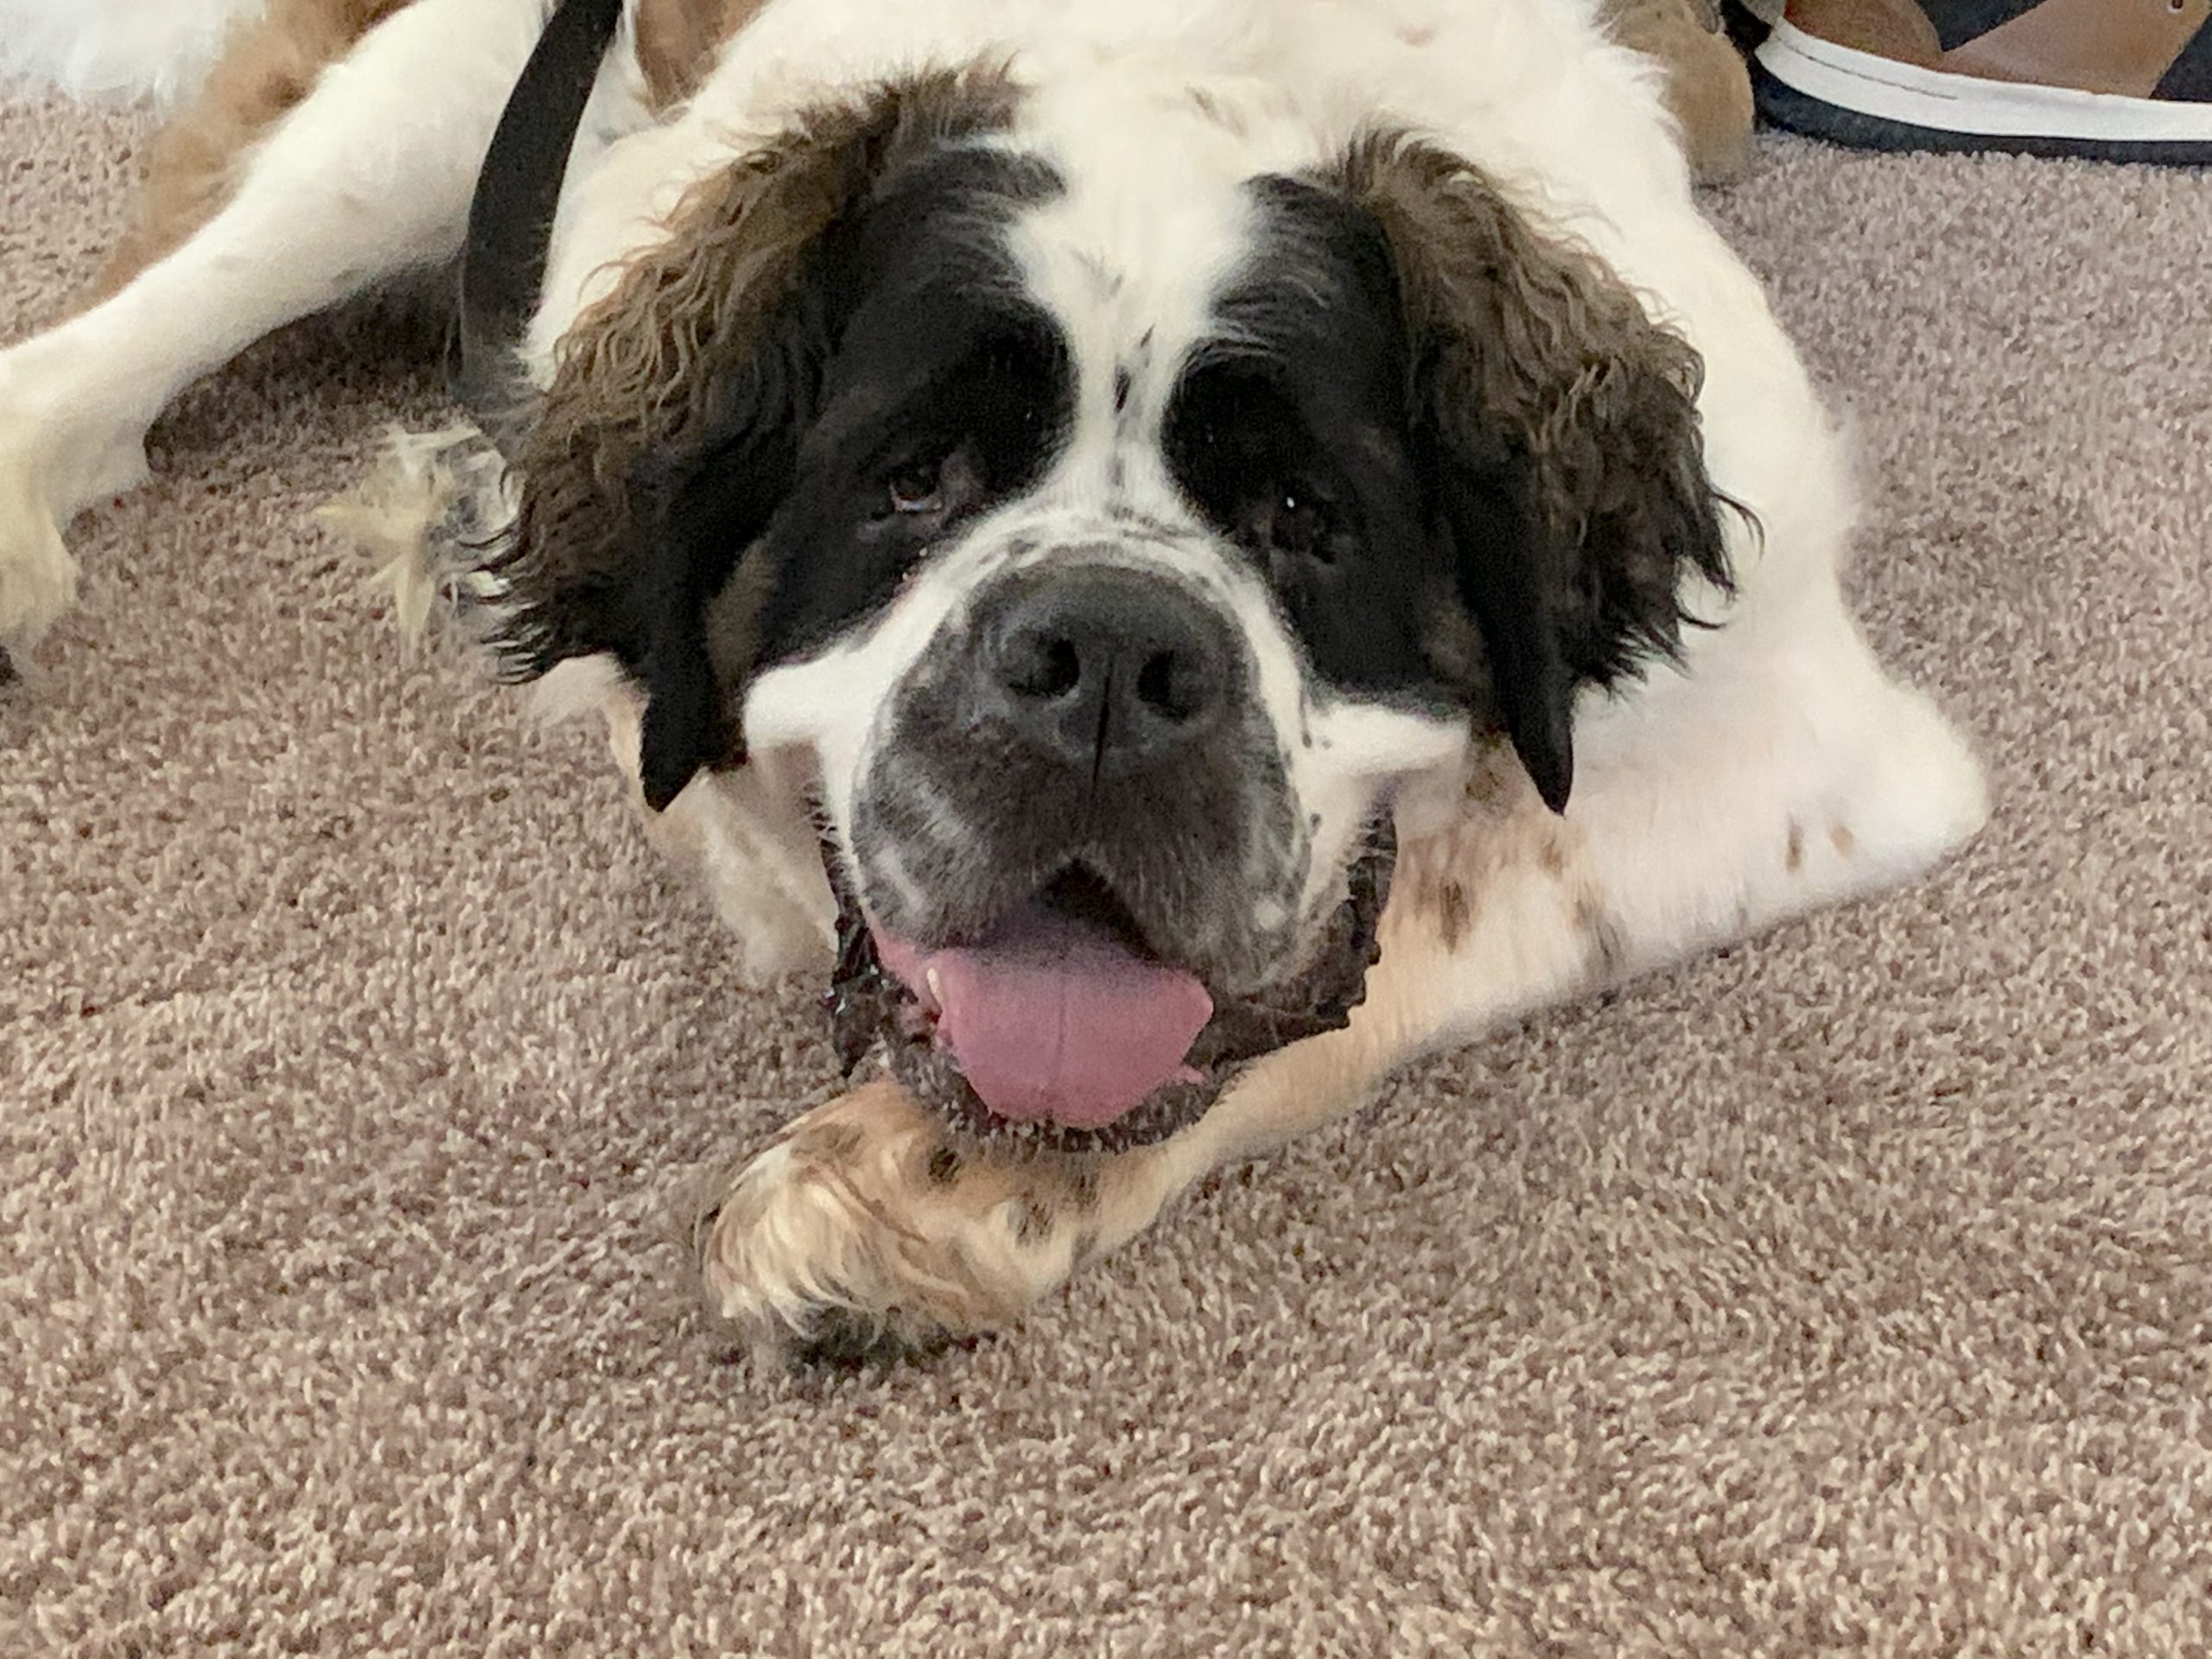 Zeus St Bernard scaled - Some Tips to Stop a Dog From Being Eye Contact Dominant